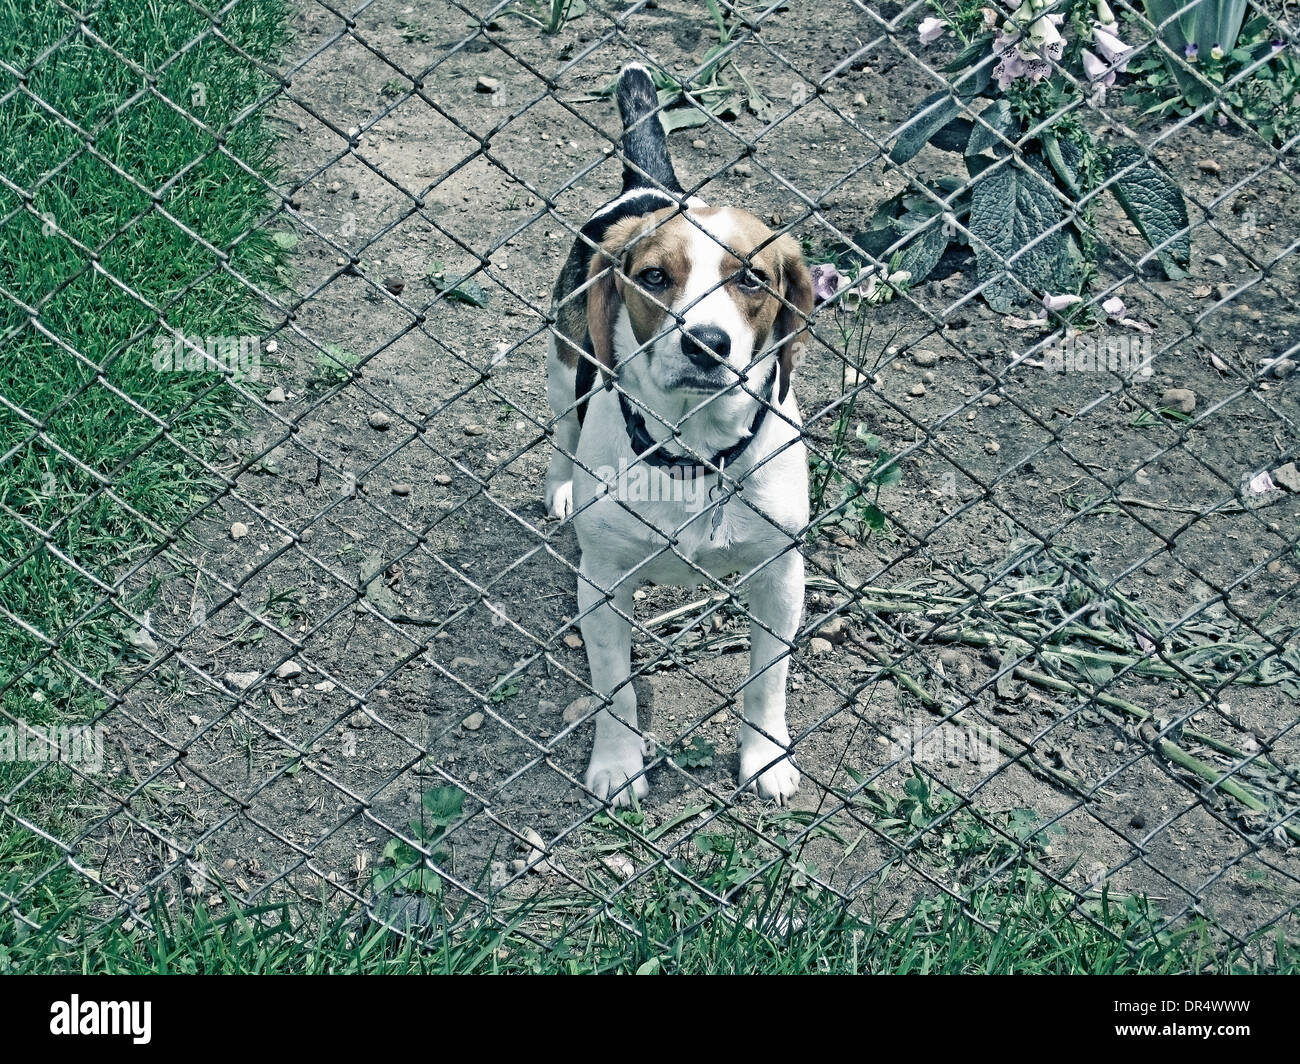 Dog peering through chain link fence Stock Photo